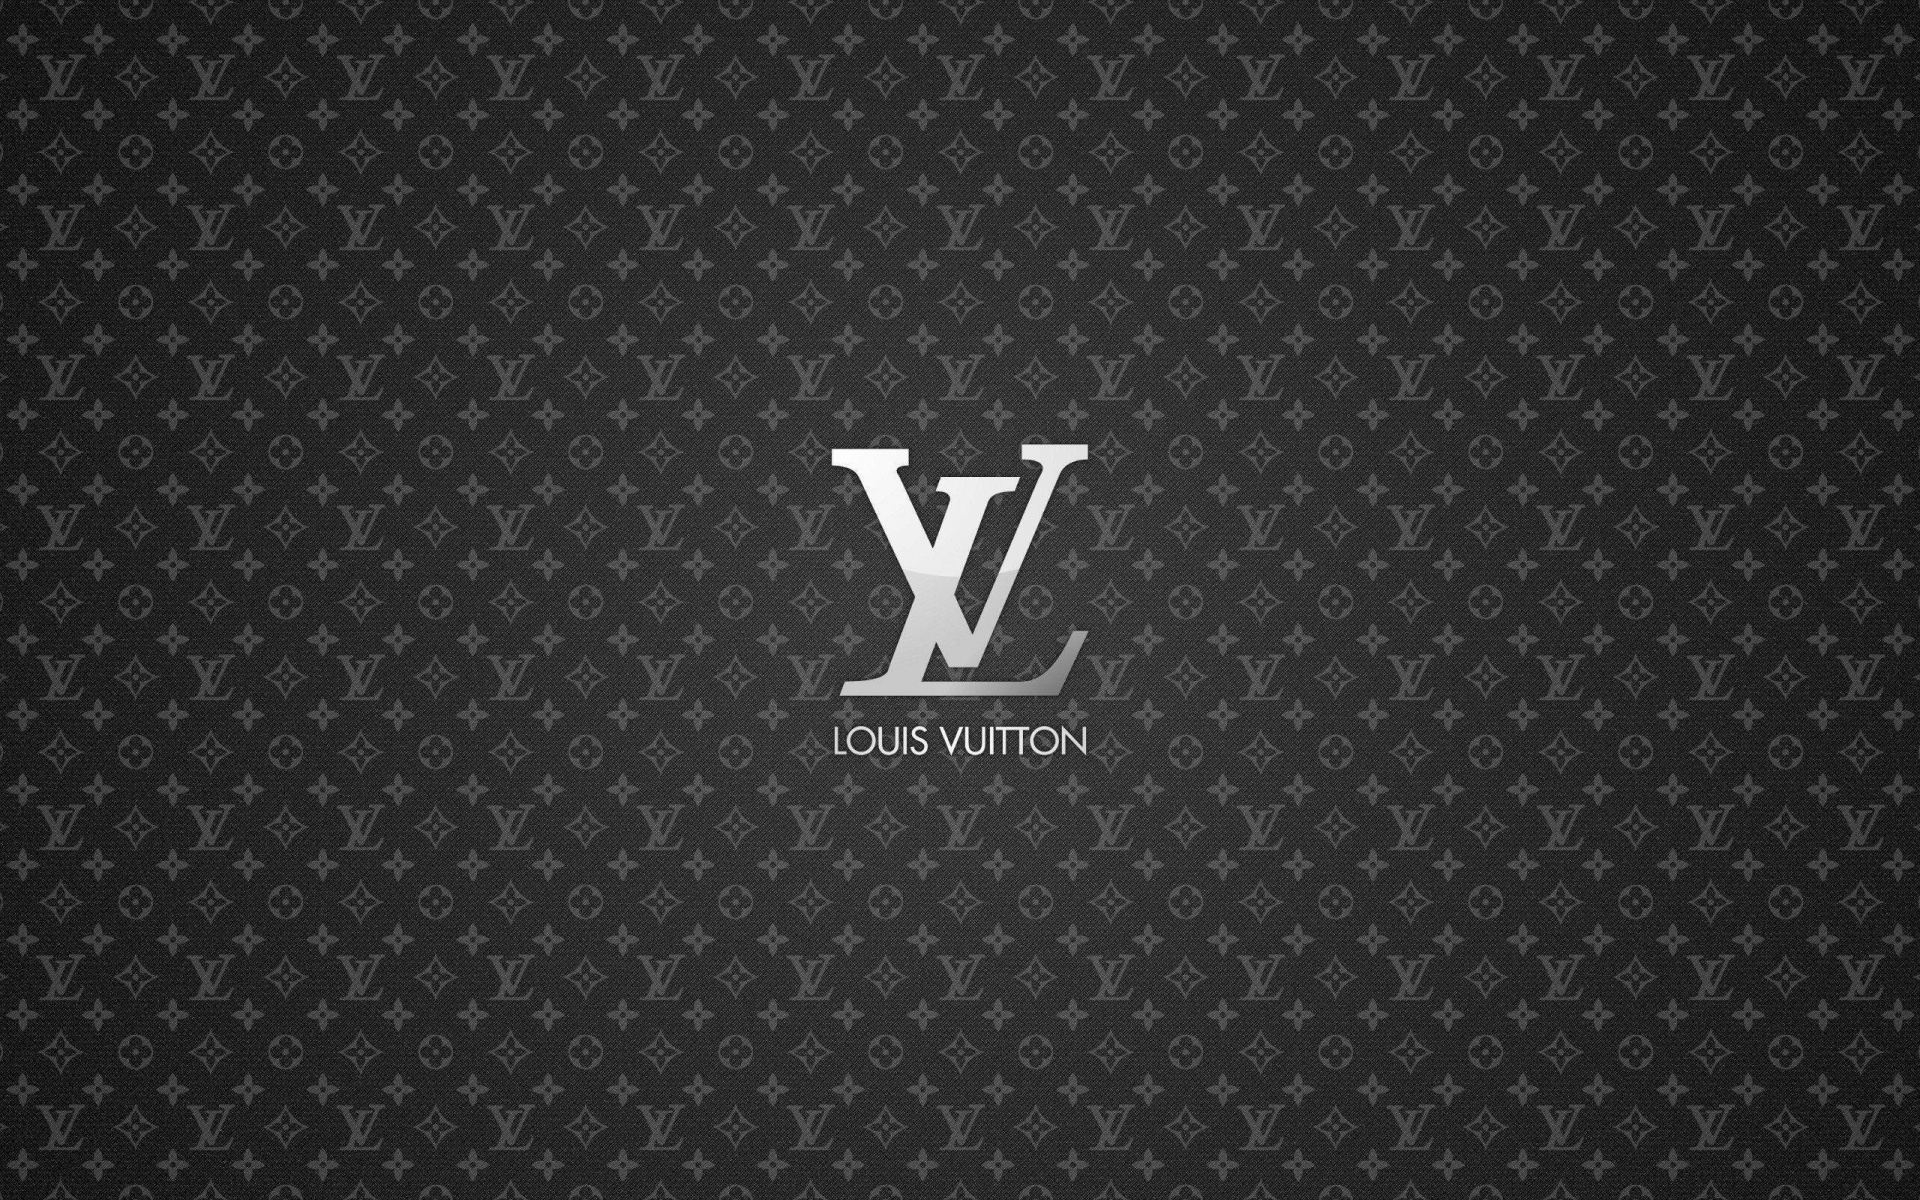 Download The iconic Louis Vuitton Logo. Wallpaper | Wallpapers.com